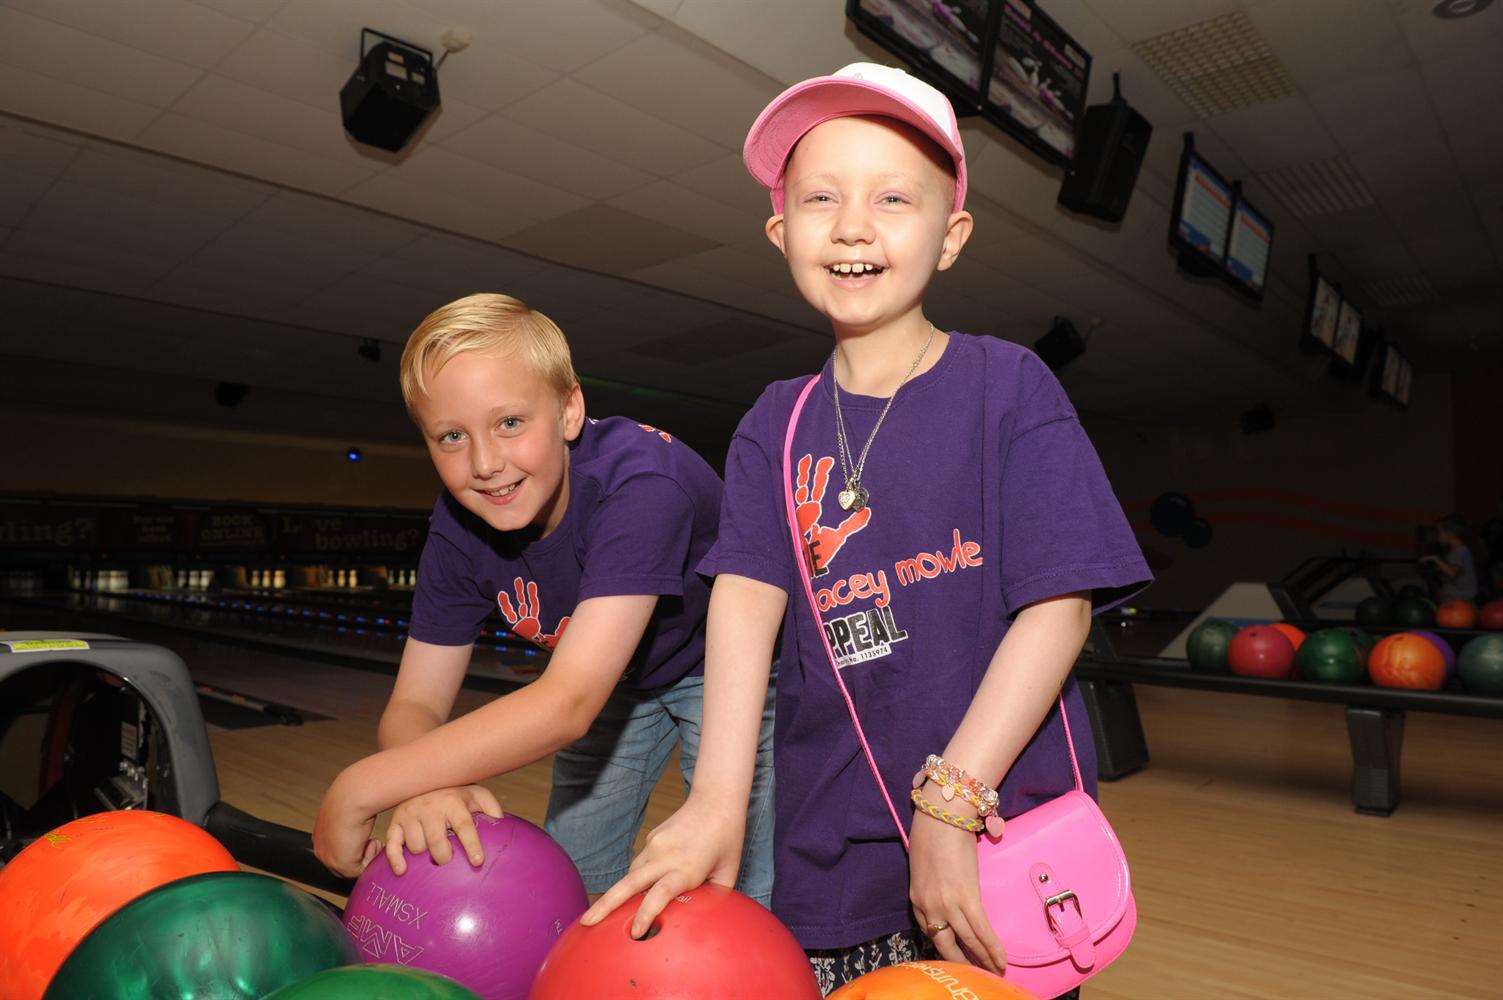 Stacey with brother Jake with AMF Bowling